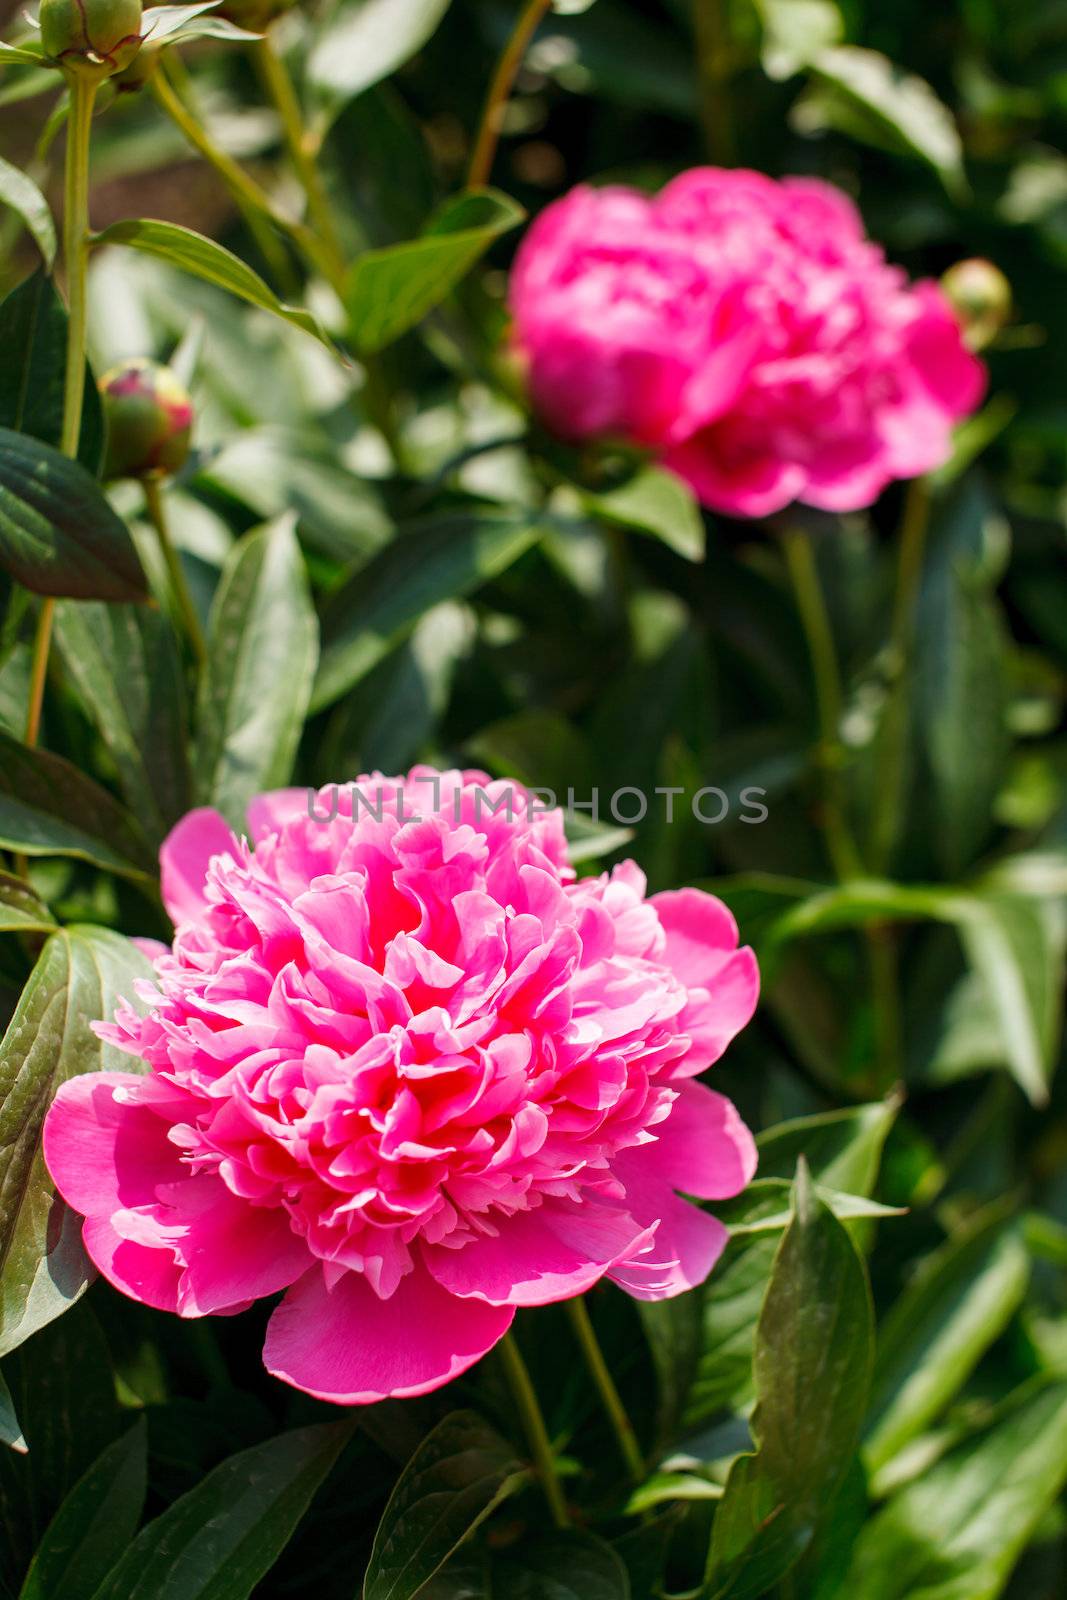 Blooming peony by shebeko